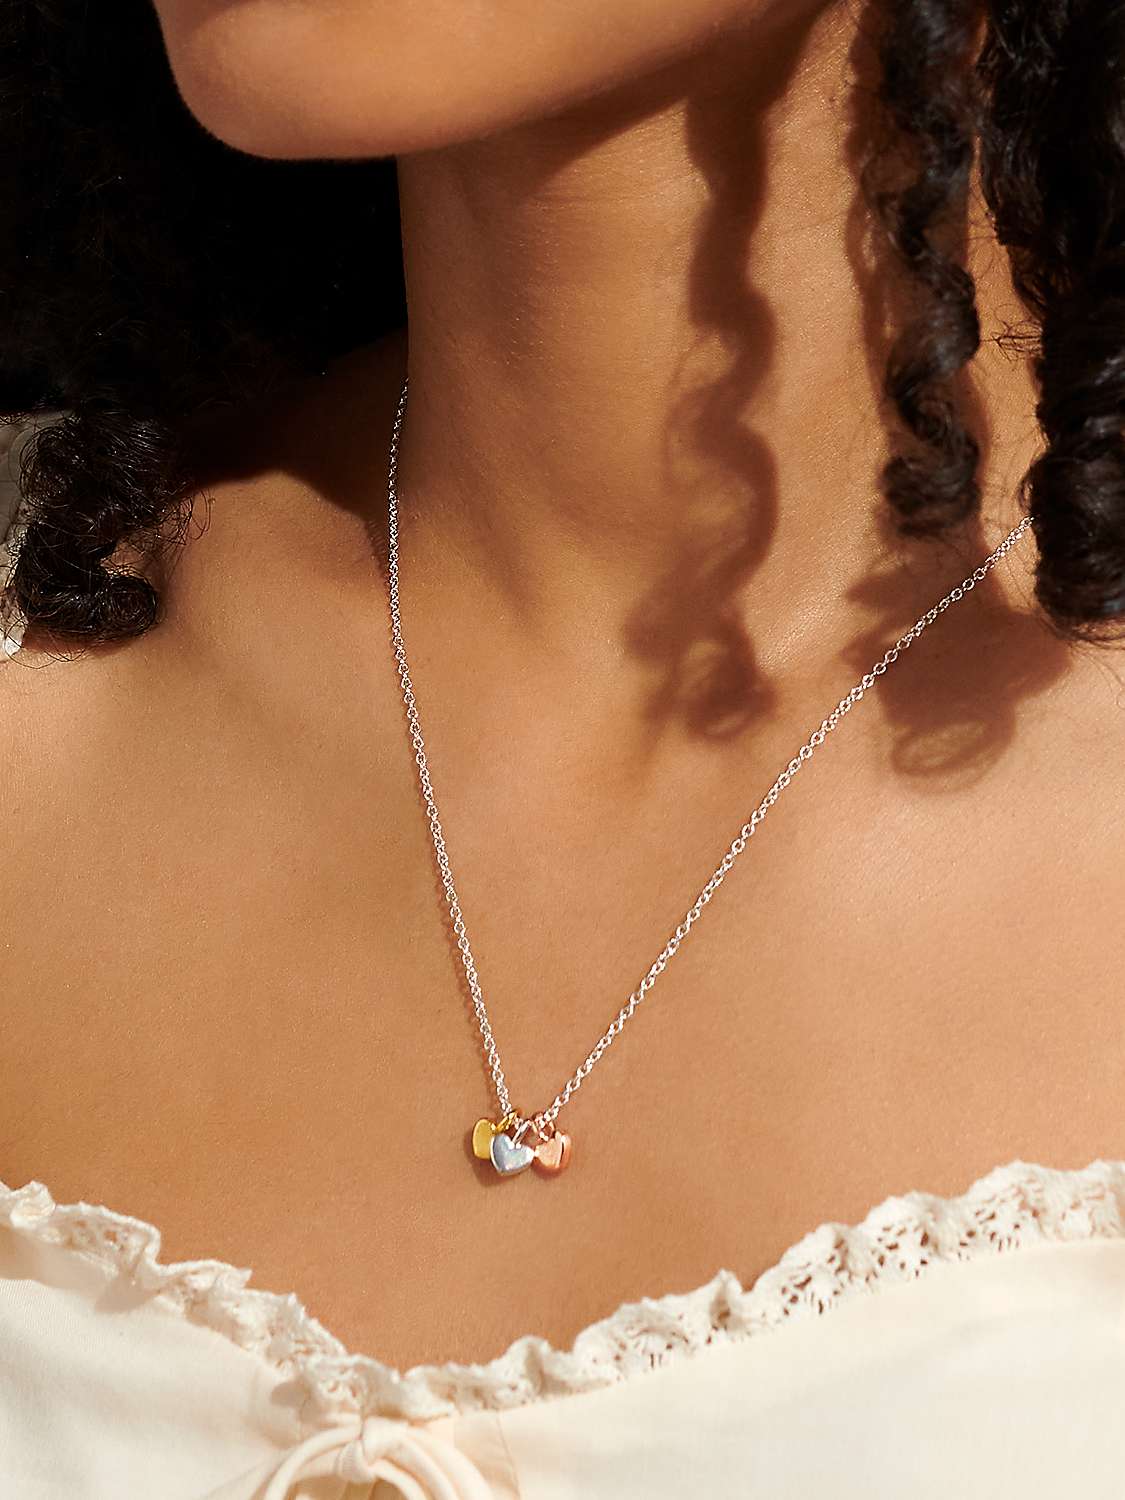 Buy Joma Jewellery Mini Charms Triple Heart Pendant Necklace, Multi Online at johnlewis.com